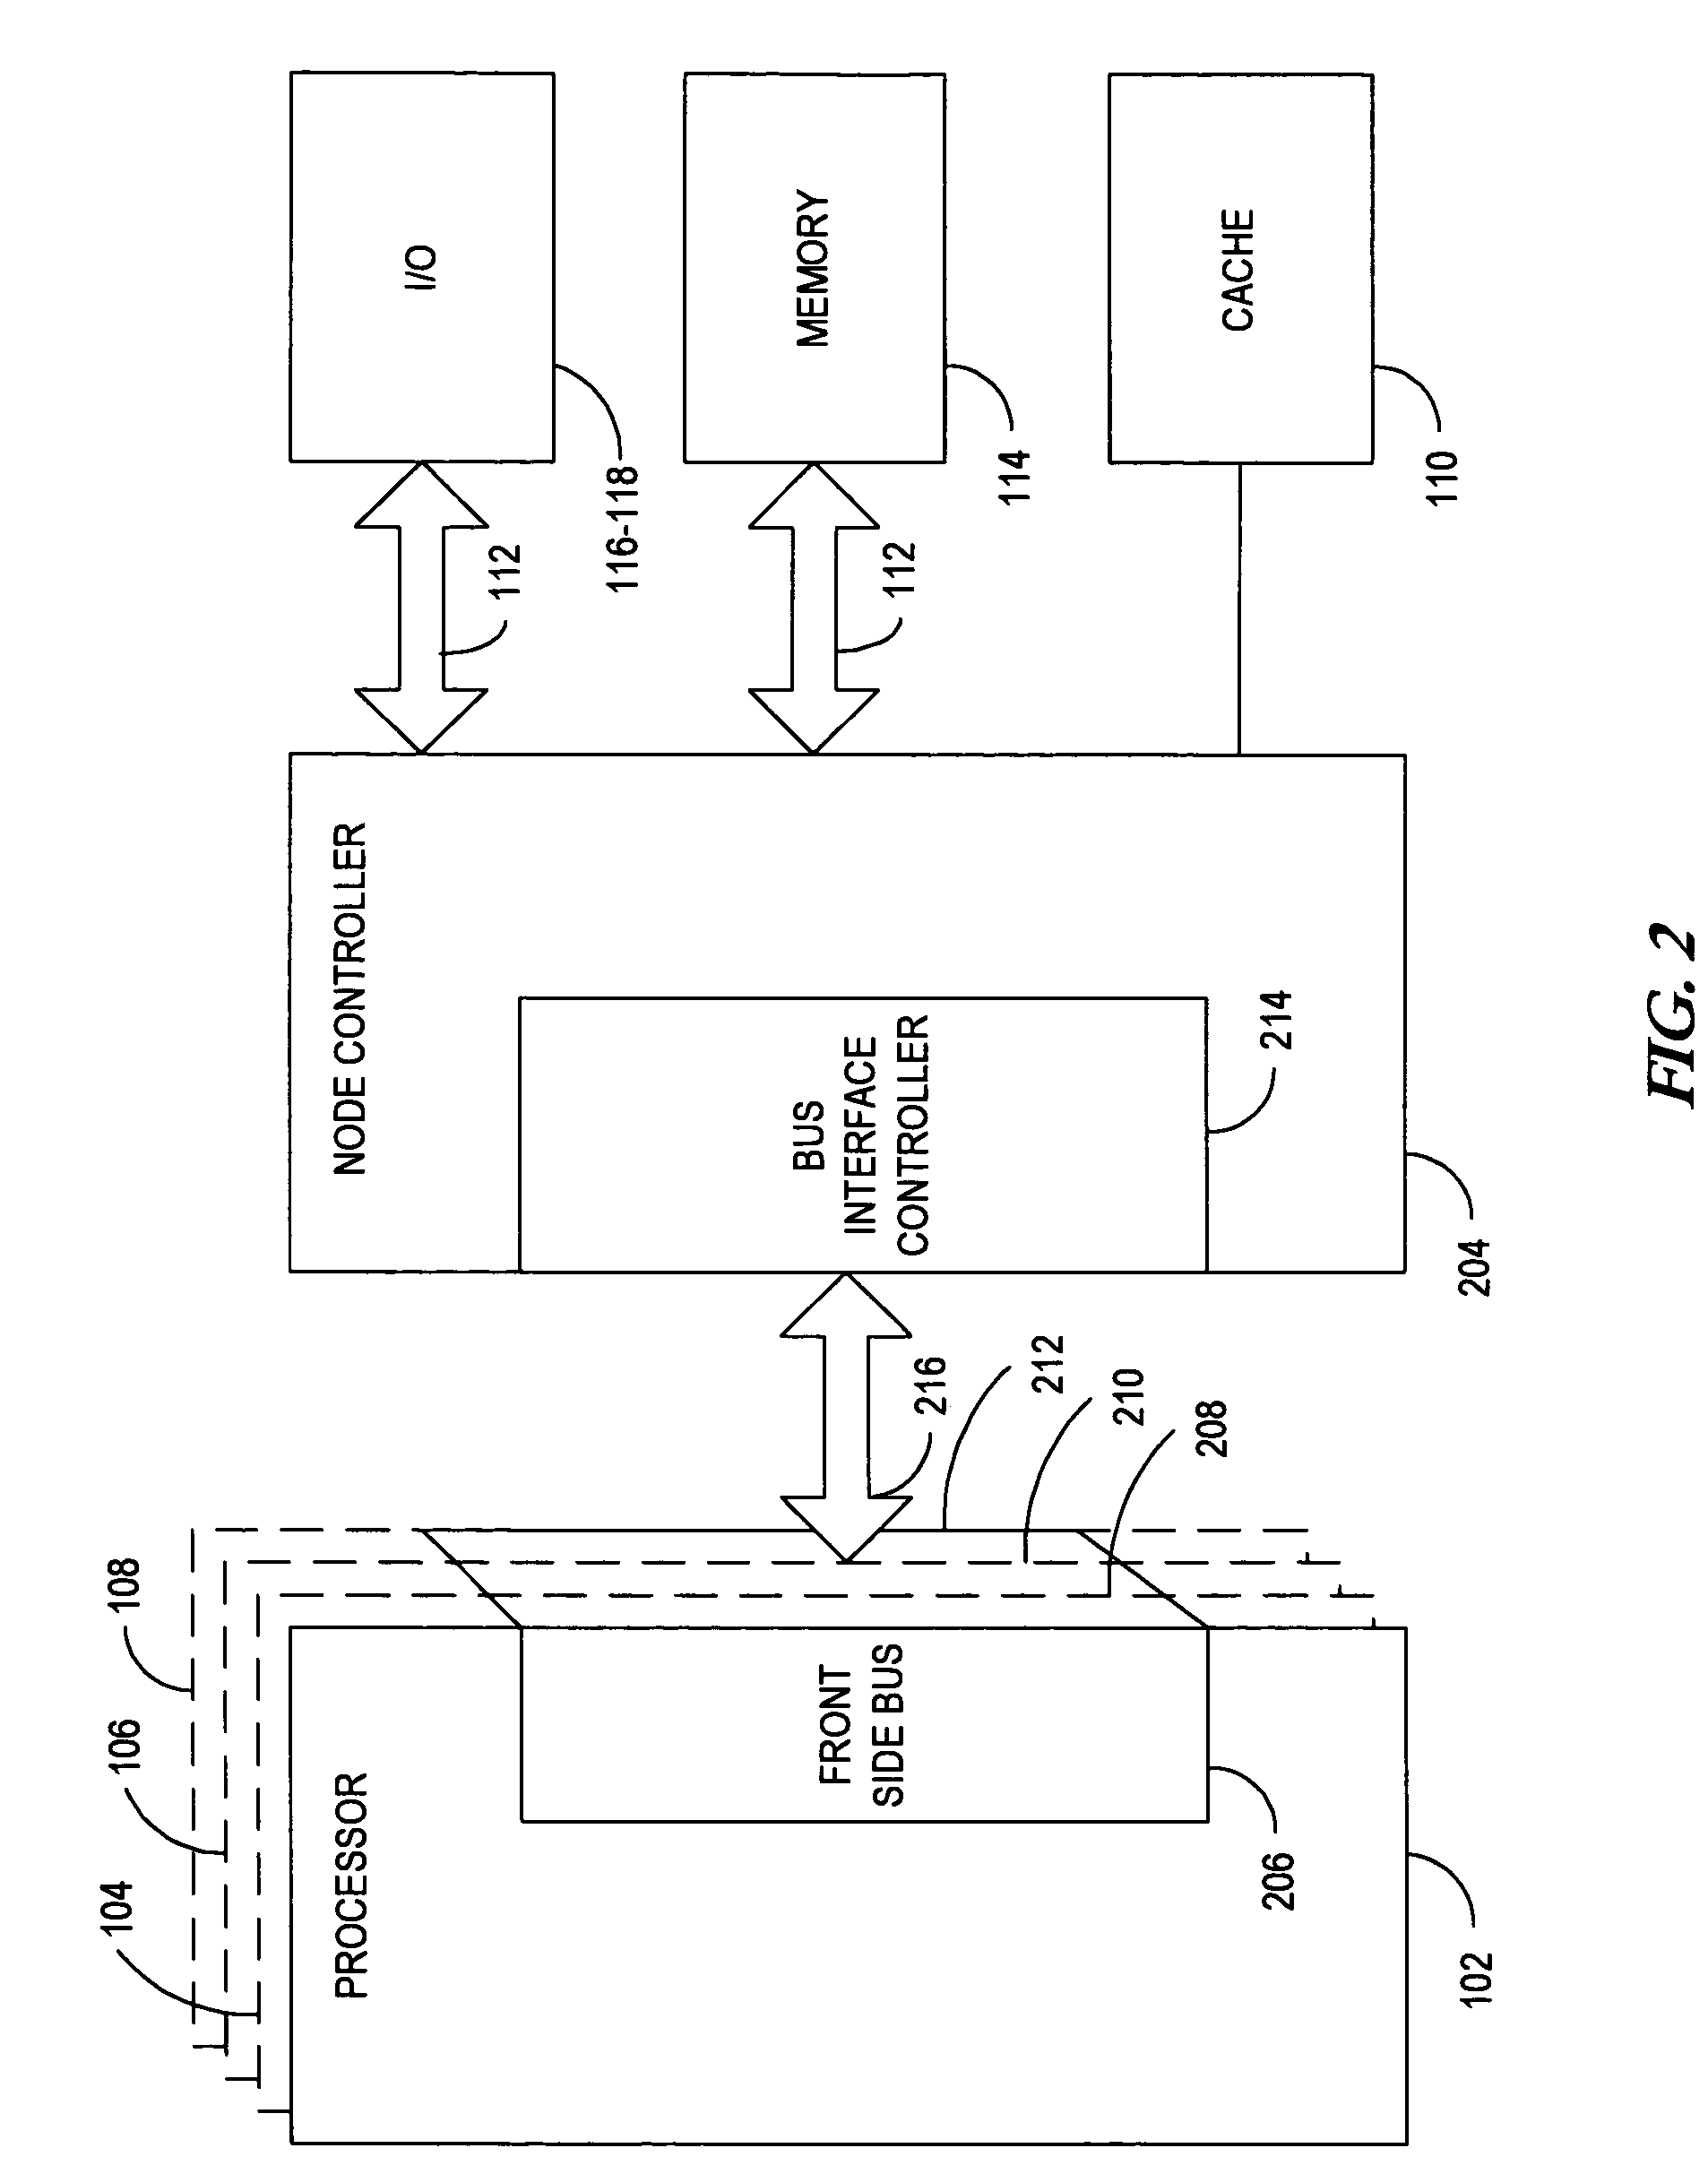 Method and apparatus for providing overlapping defer phase responses